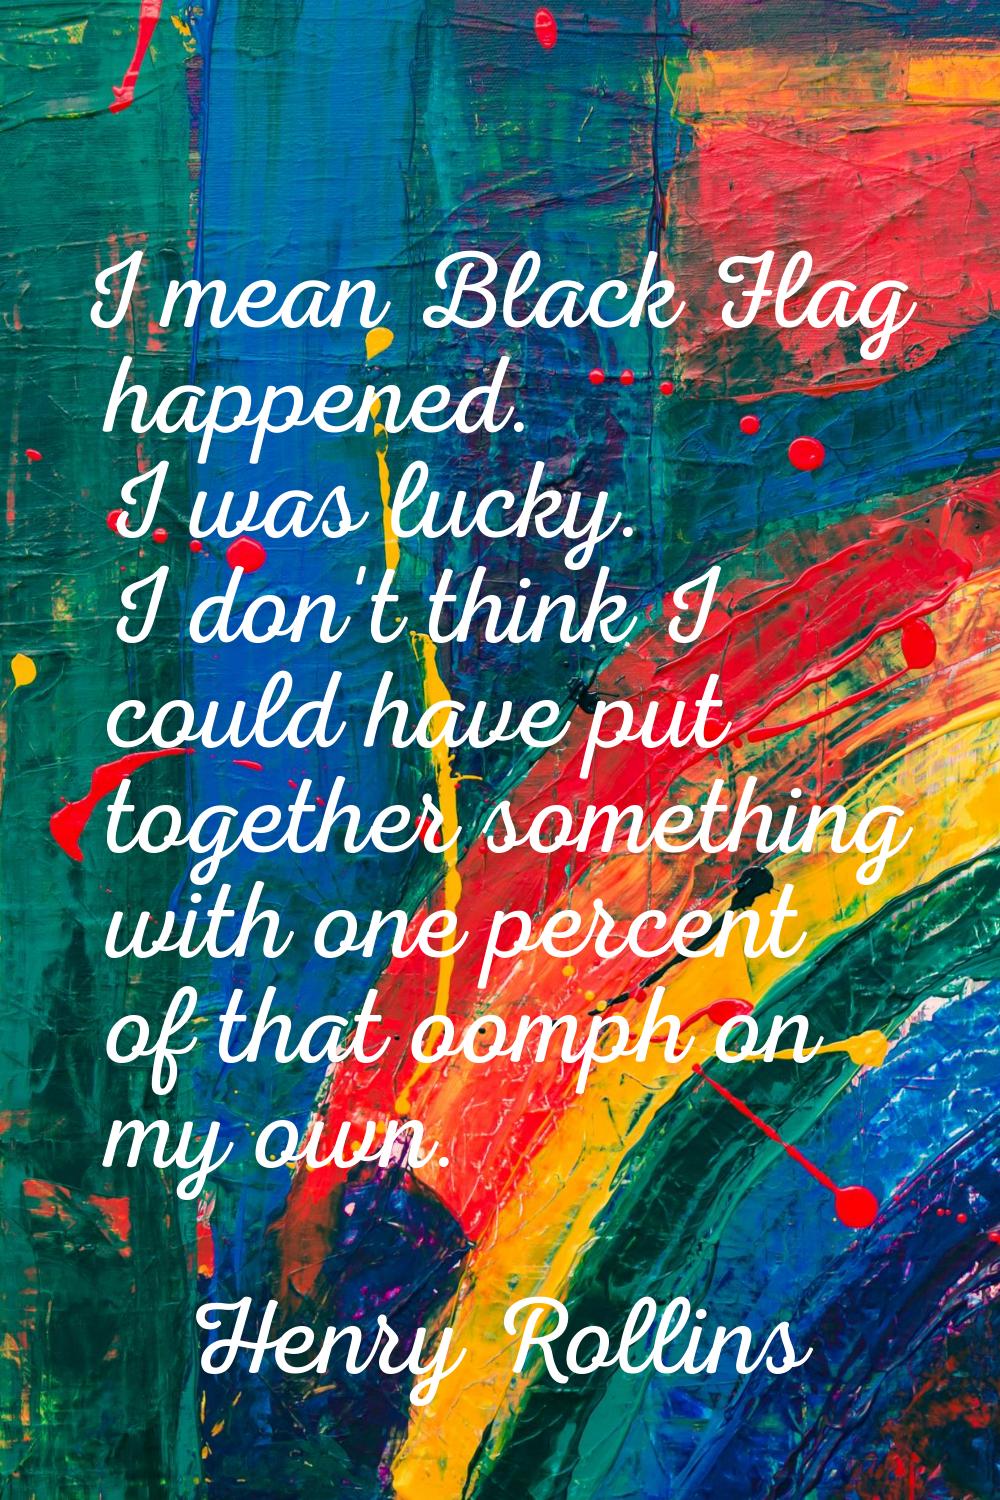 I mean Black Flag happened. I was lucky. I don't think I could have put together something with one